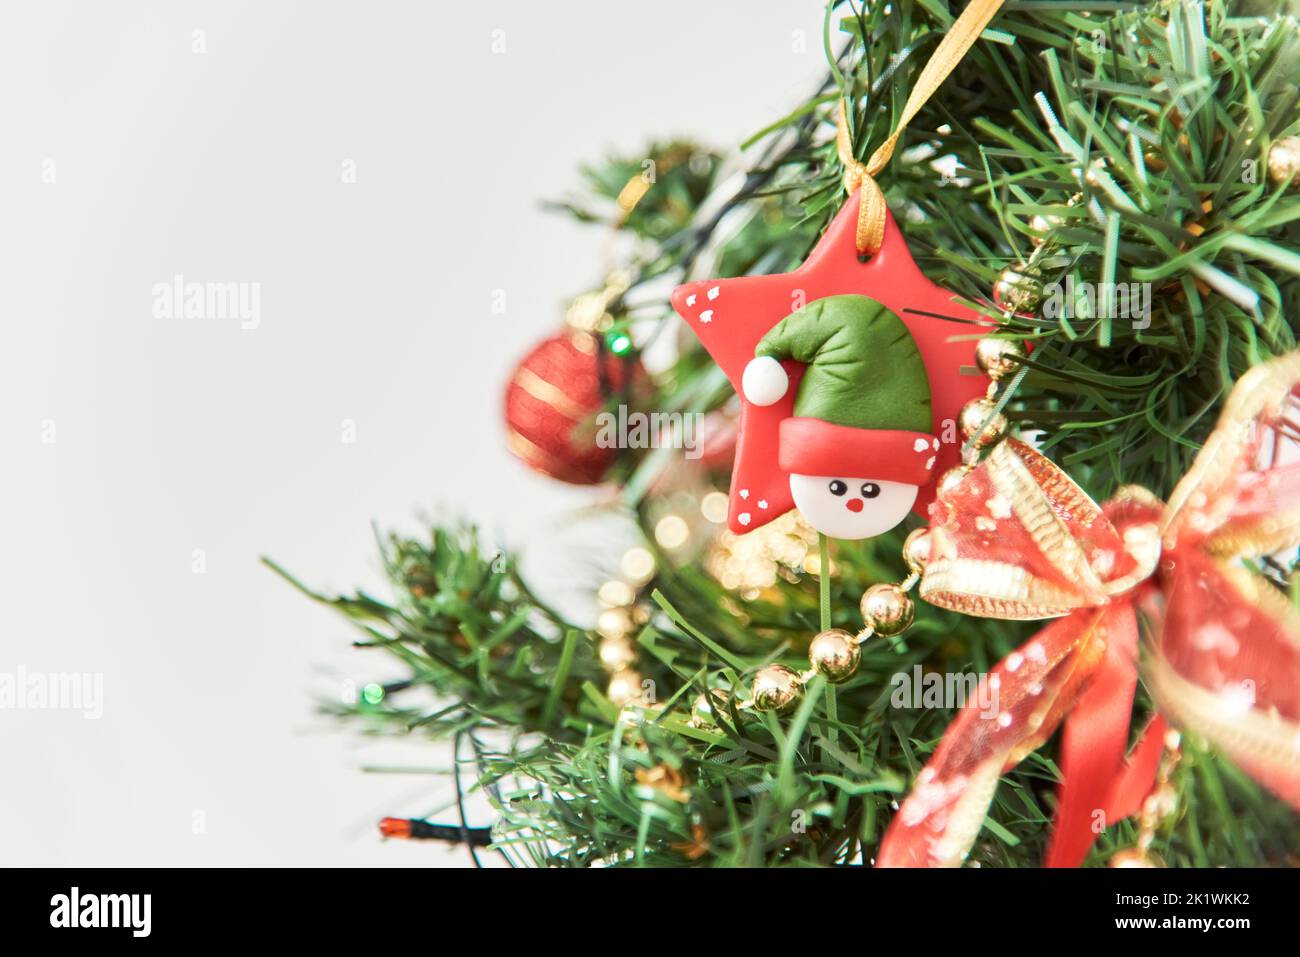 Close-up view of a Christmas tree with ornaments in traditional colors, red, green and gold. Composition with selective focus and copy space. Stock Photo